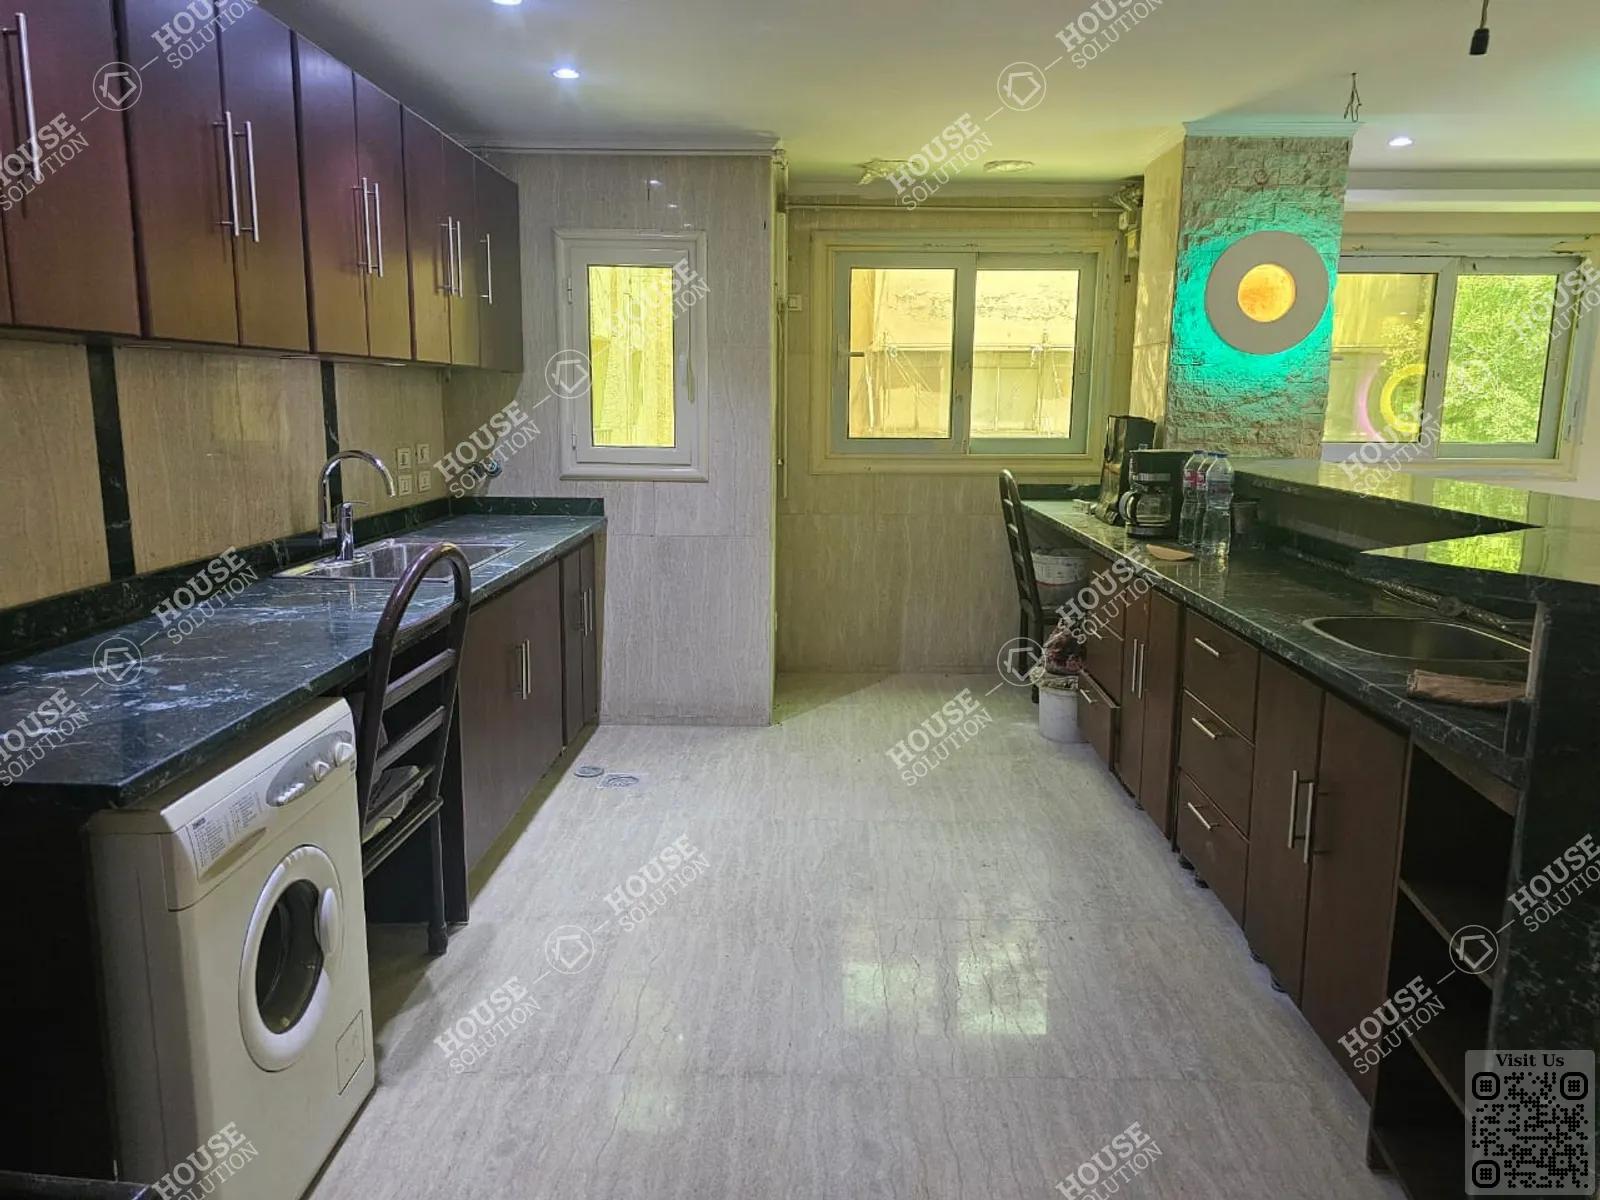 KITCHEN  @ Apartments For Rent In Maadi Maadi Degla Area: 200 m² consists of 3 Bedrooms 4 Bathrooms Furnished 5 stars #5916-1